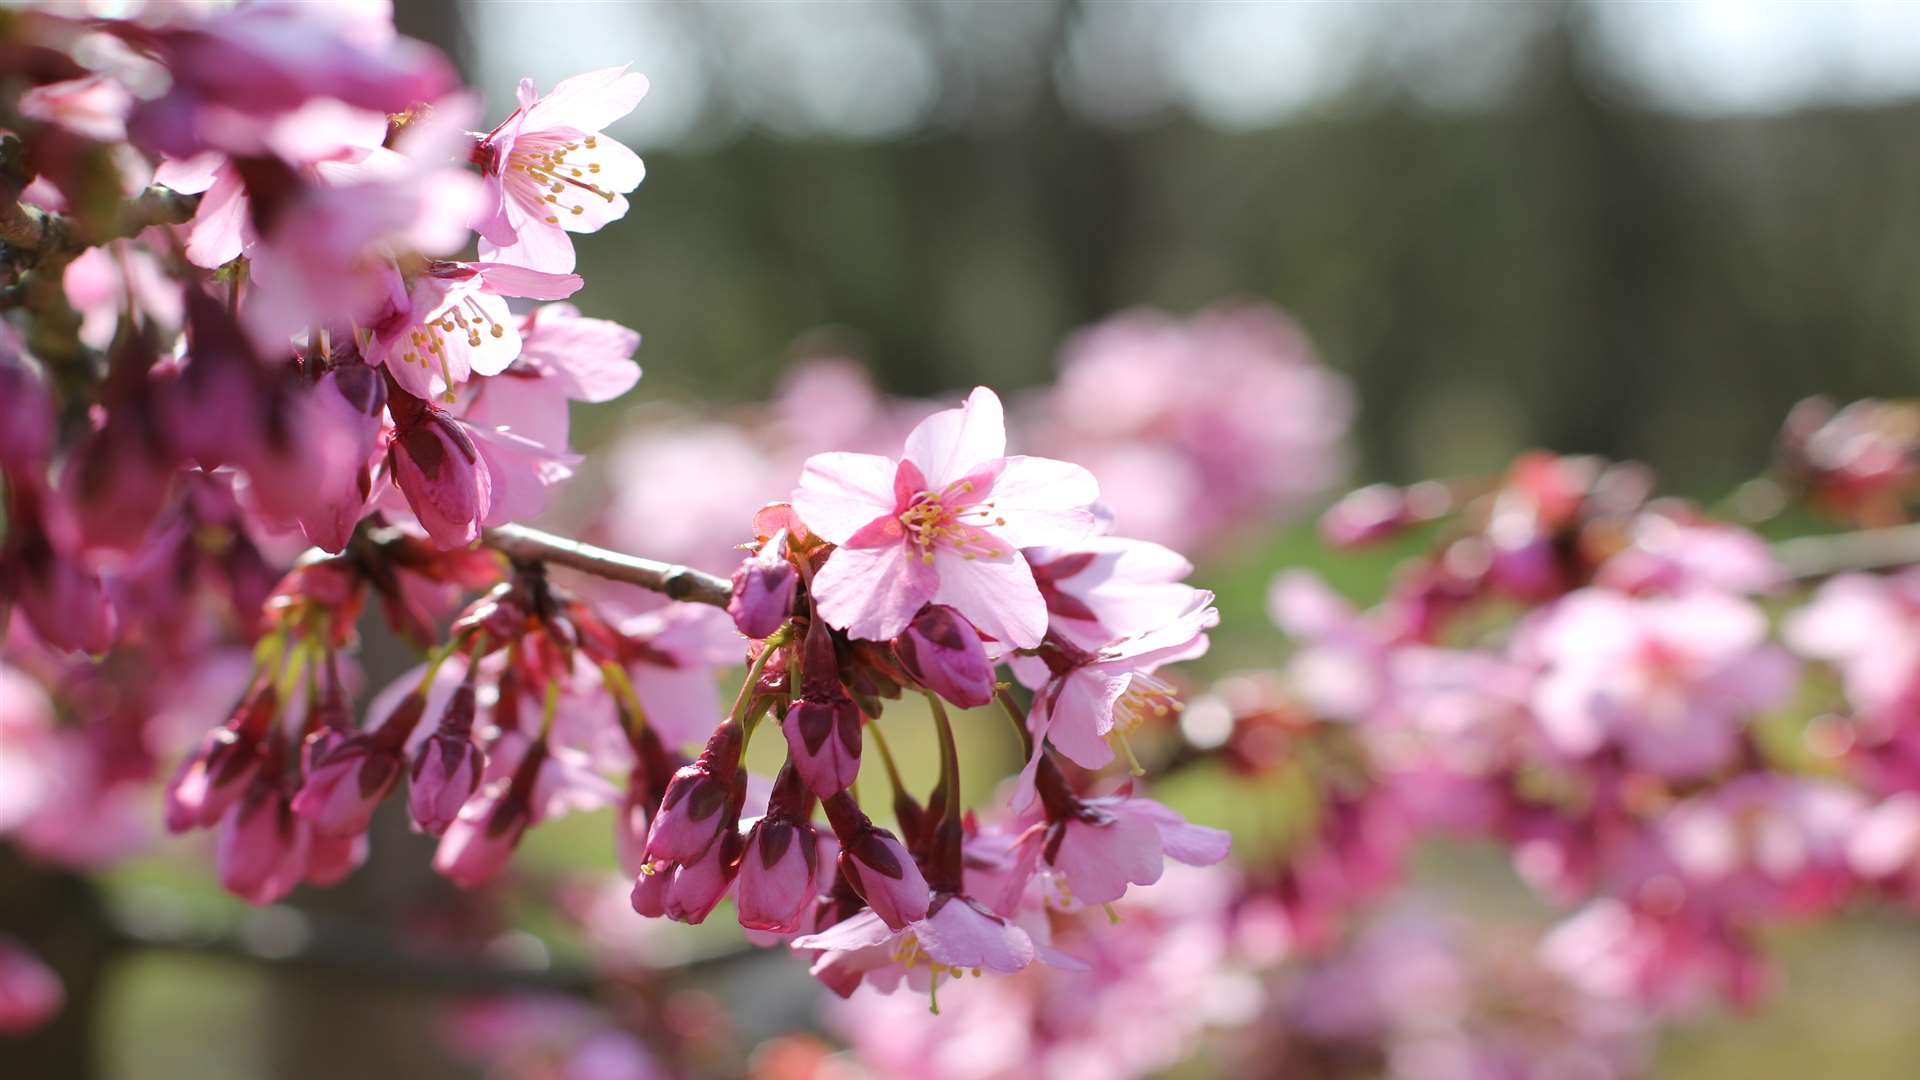 Japanese blossom will be out for the Hanami festival